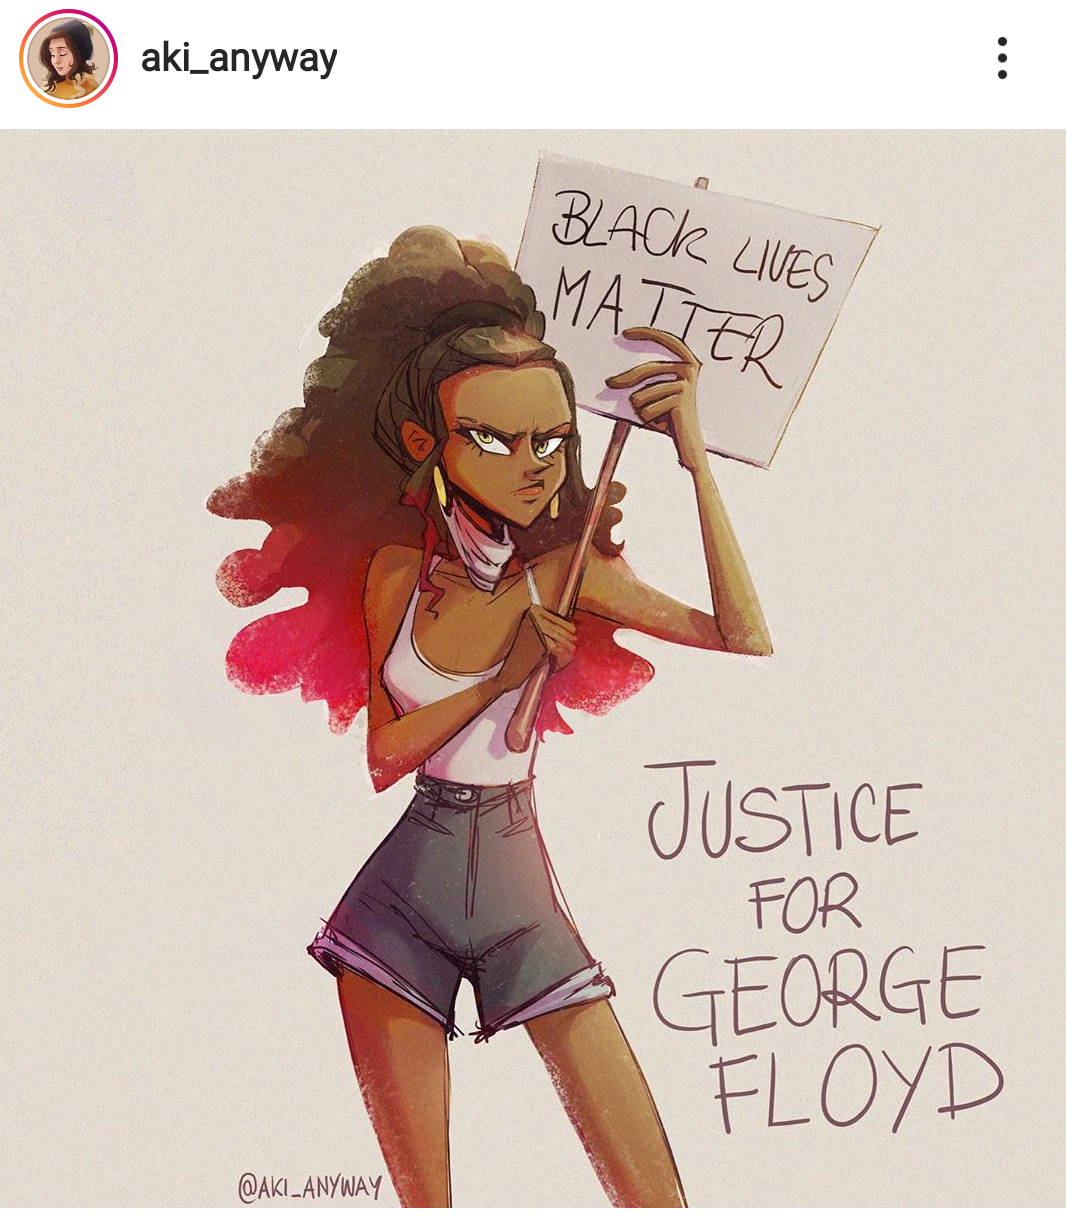 A cartoon of a black woman raising her fist, says Justice for George Floyd